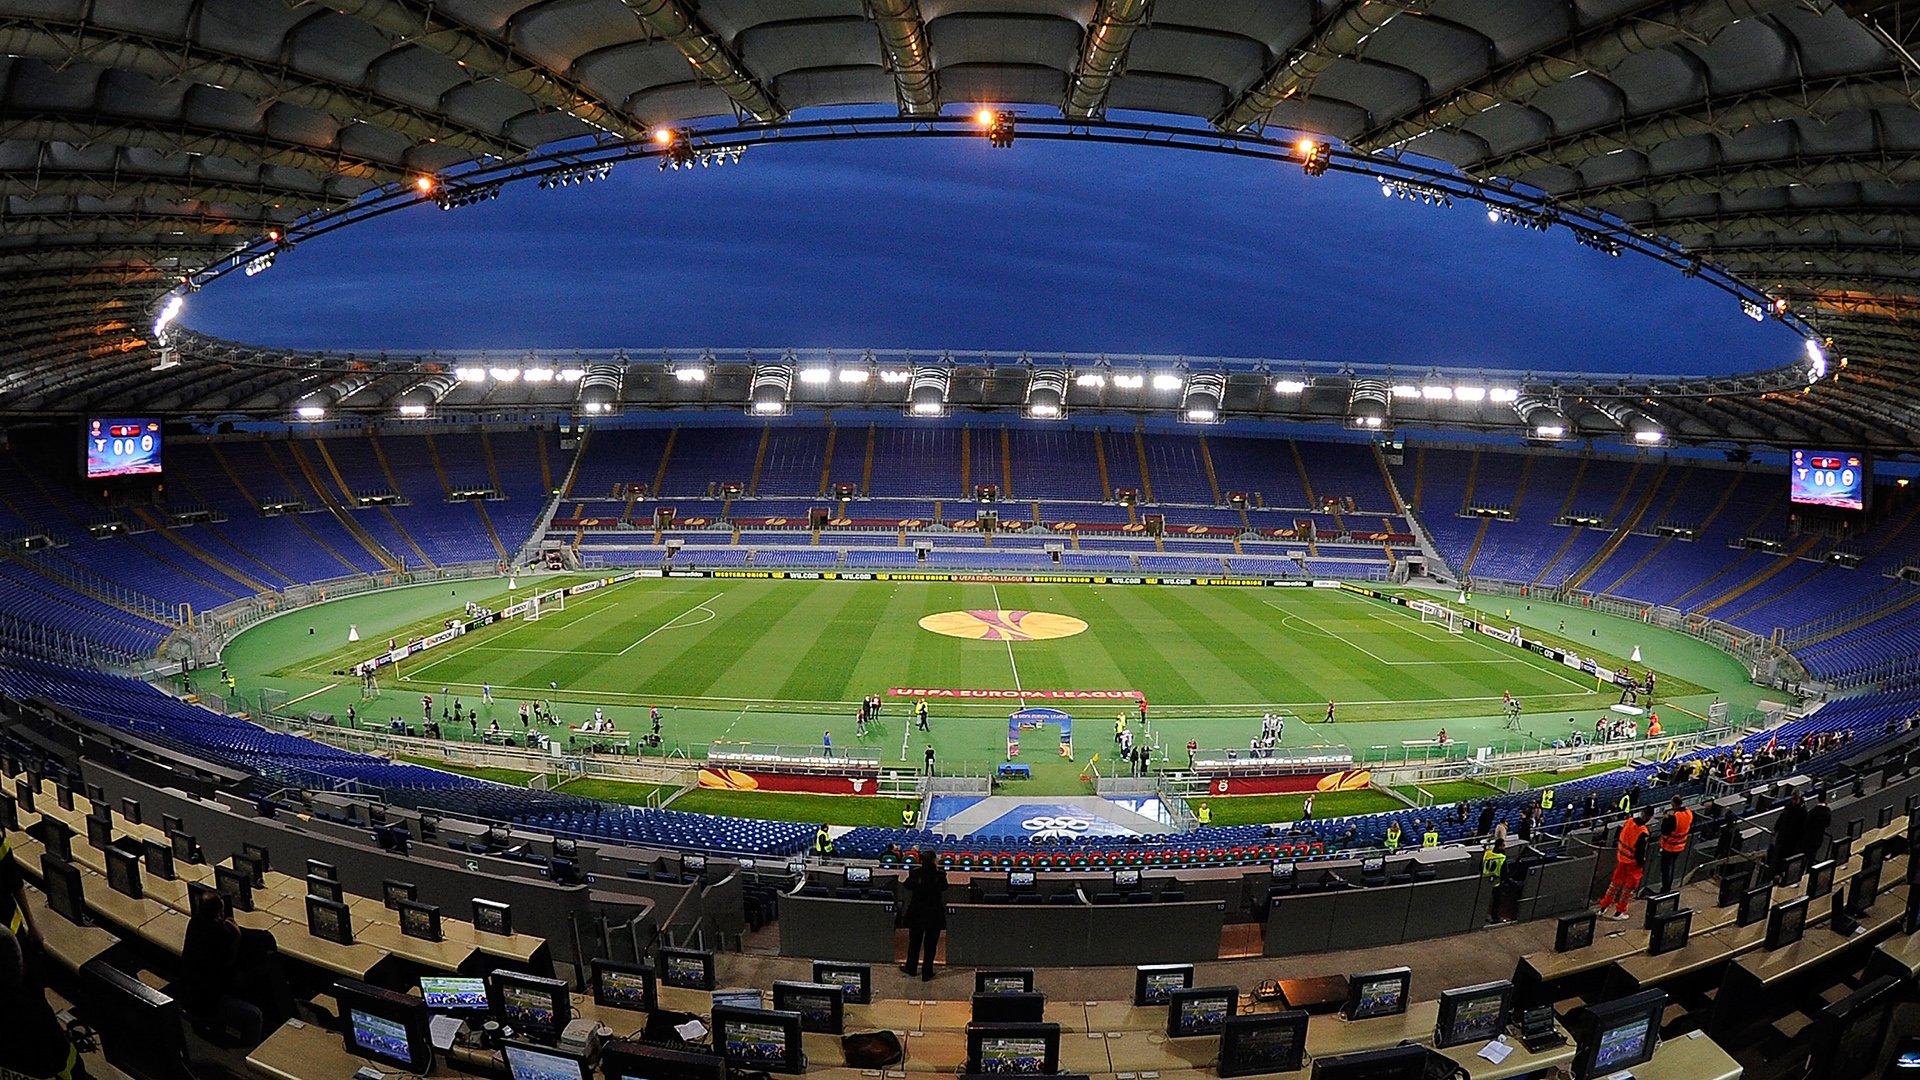 AS Roma VS Lazio ( BETTING TIPS, Match Preview & Expert Analysis )